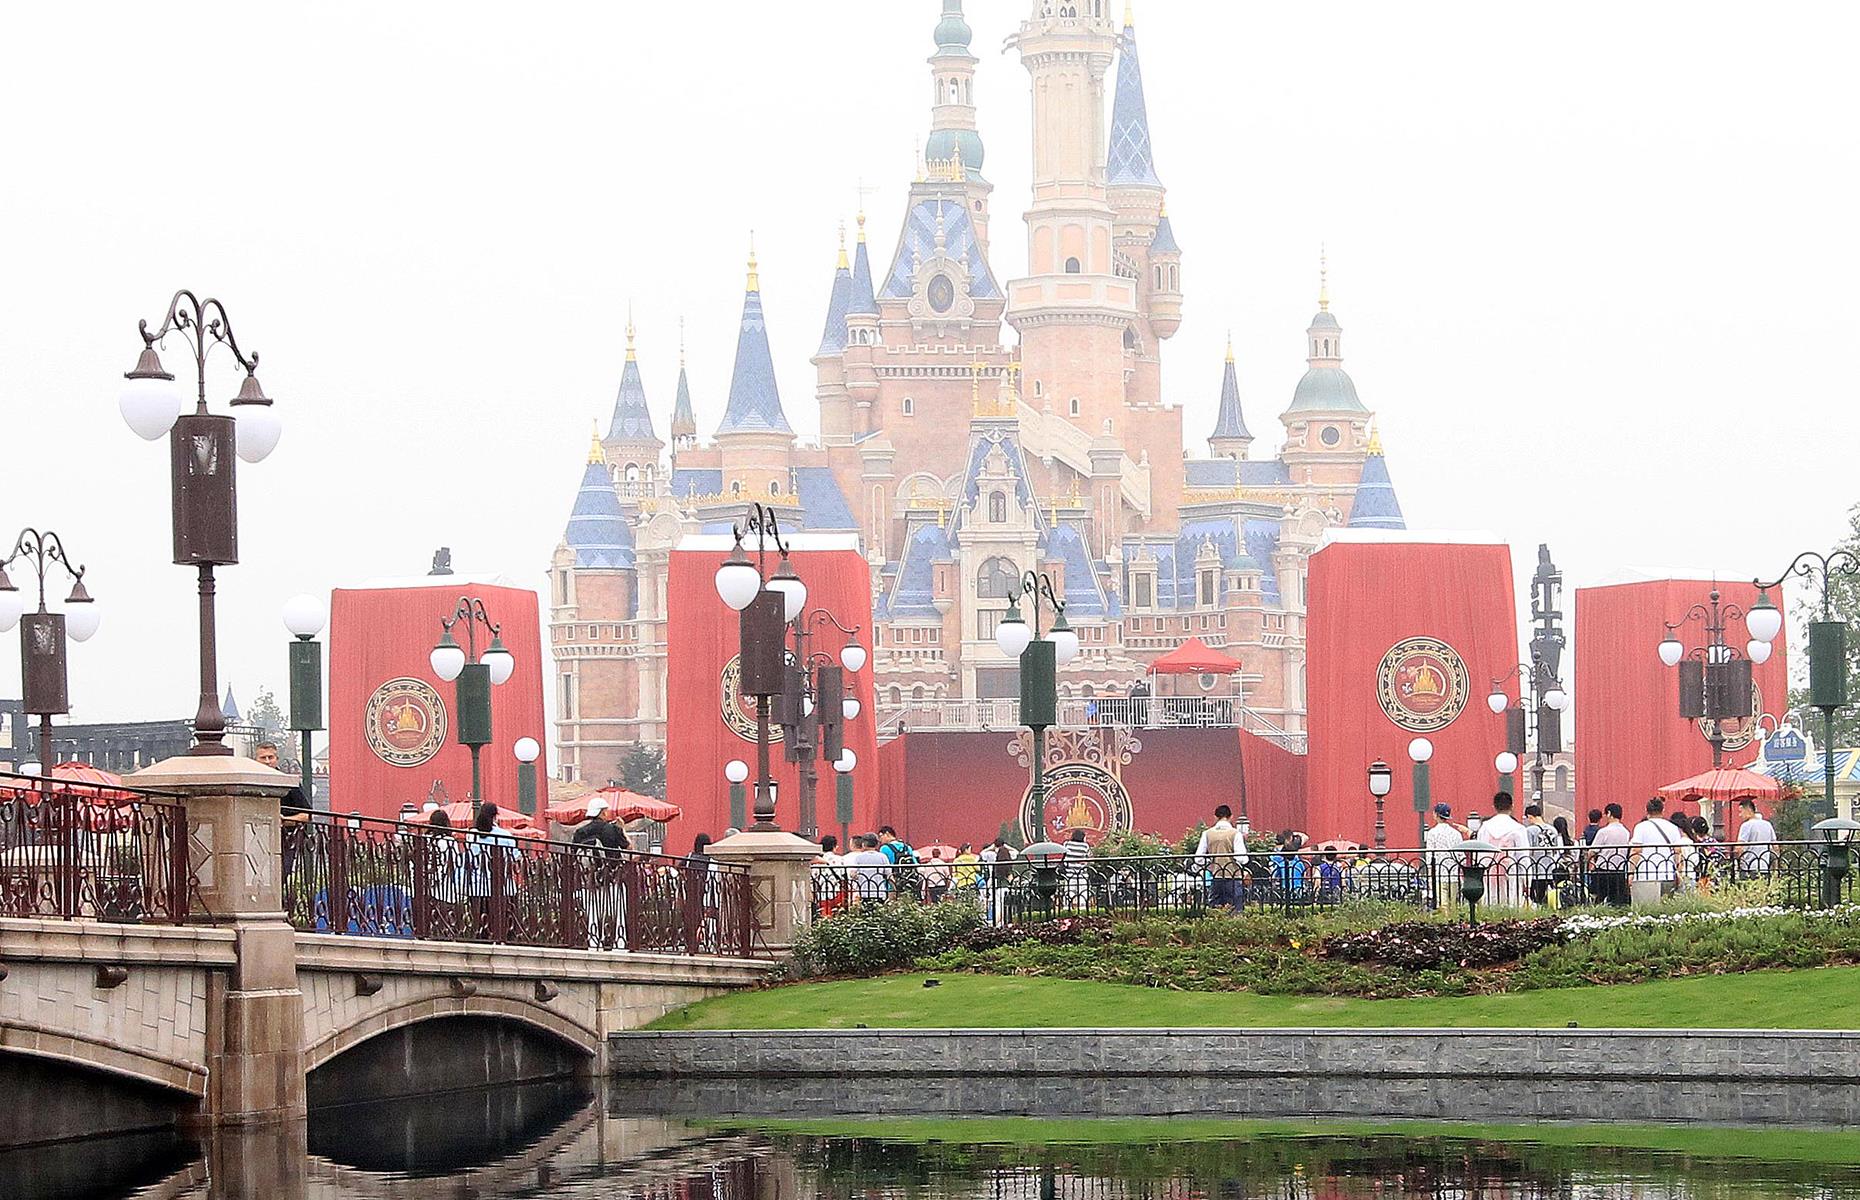 In summer 2016, Shanghai Disneyland Park – the third Disney park in Asia – opened to the public. It had all the usual trappings from themed lands and costumed characters to mega rides and fast-food spots. Best of all, though, is its castle. The Enchanted Storybook Castle is still the biggest in any of the Disney parks and it's devoted to not one, but all of the Disney princesses. It's snapped here on the park's opening day, on 16 June 2016.